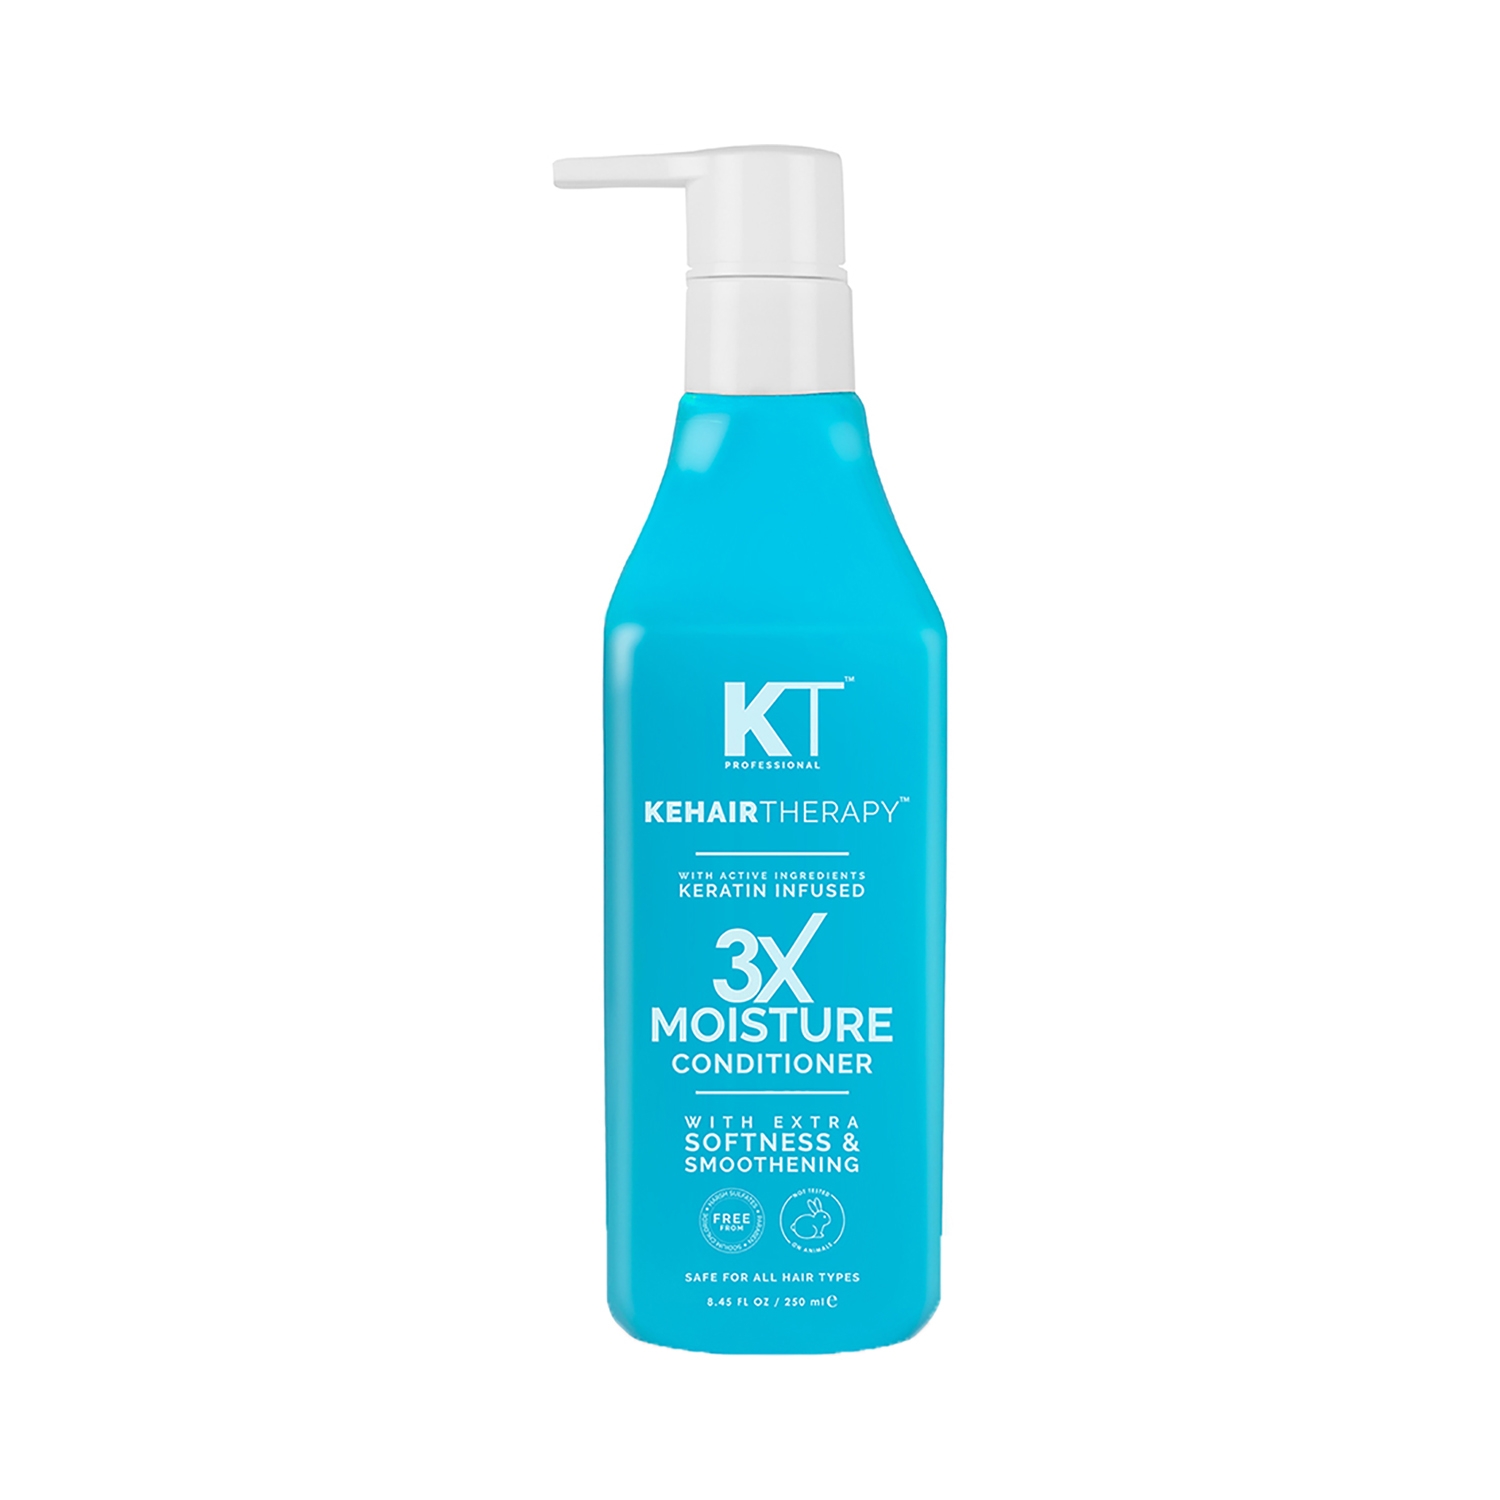 KT Professional | KT Professional Kehairtherapy 3X Moisture Conditioner (250ml)